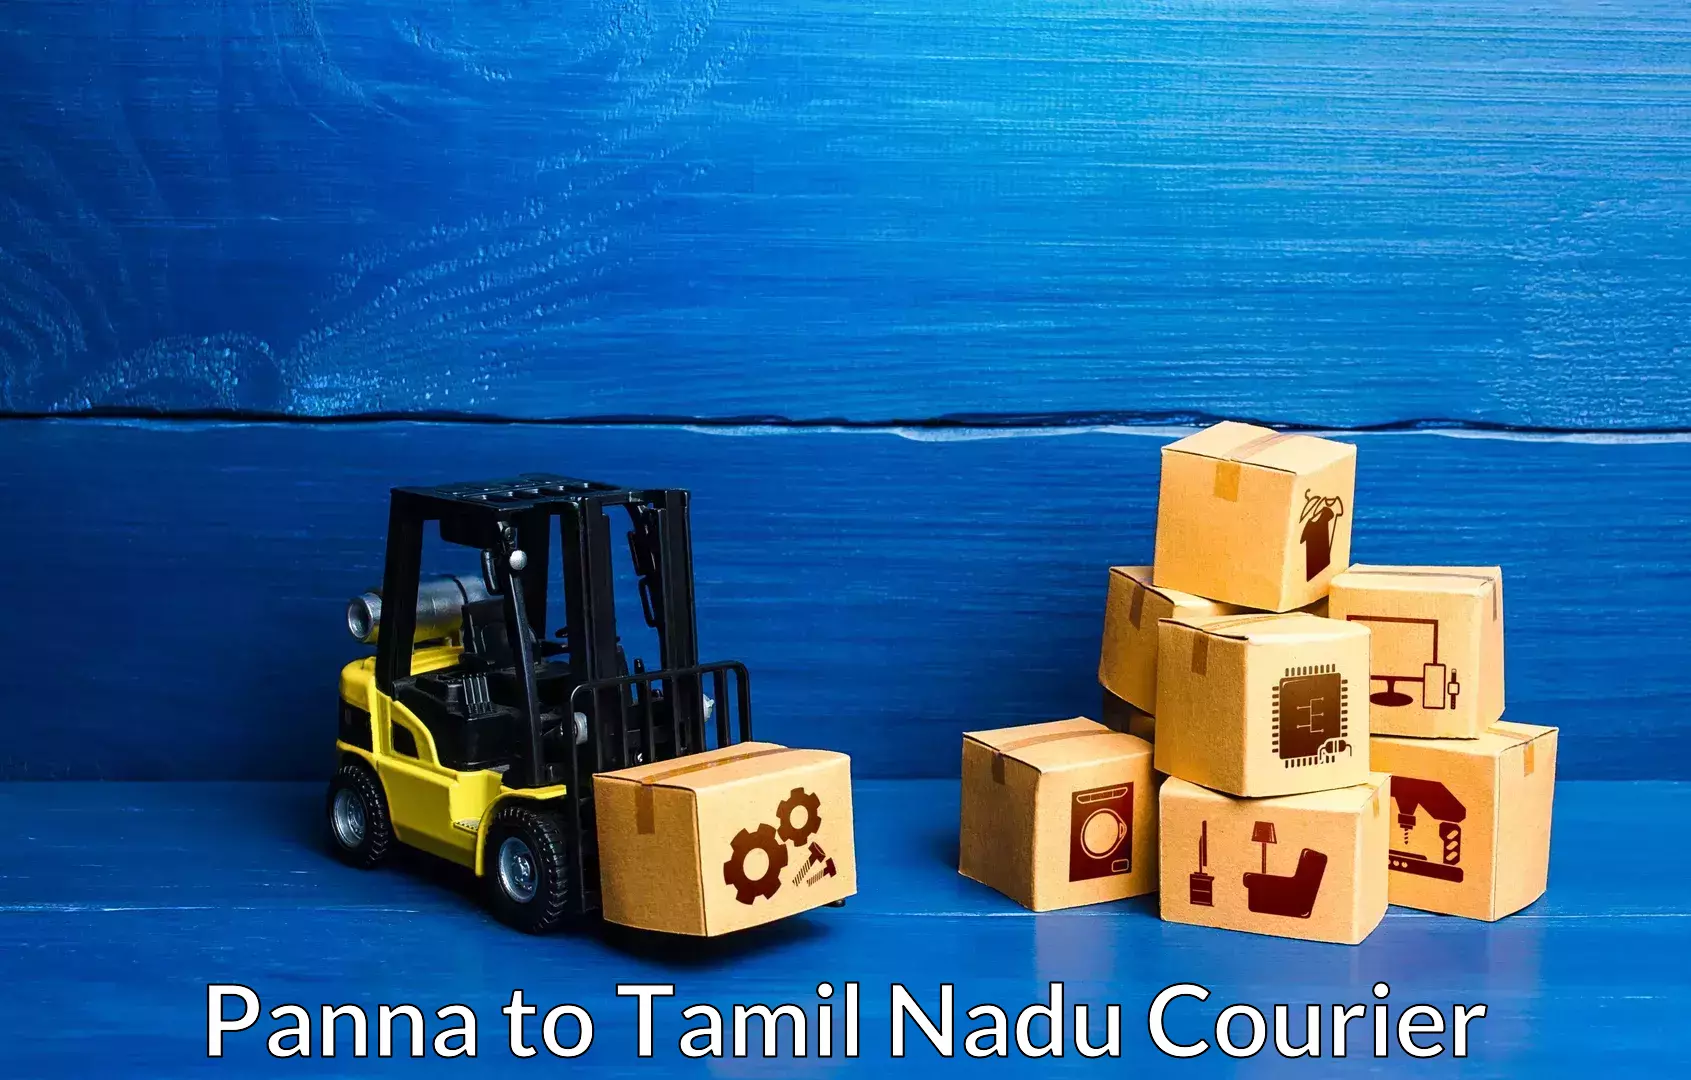 Professional movers Panna to Ennore Port Chennai